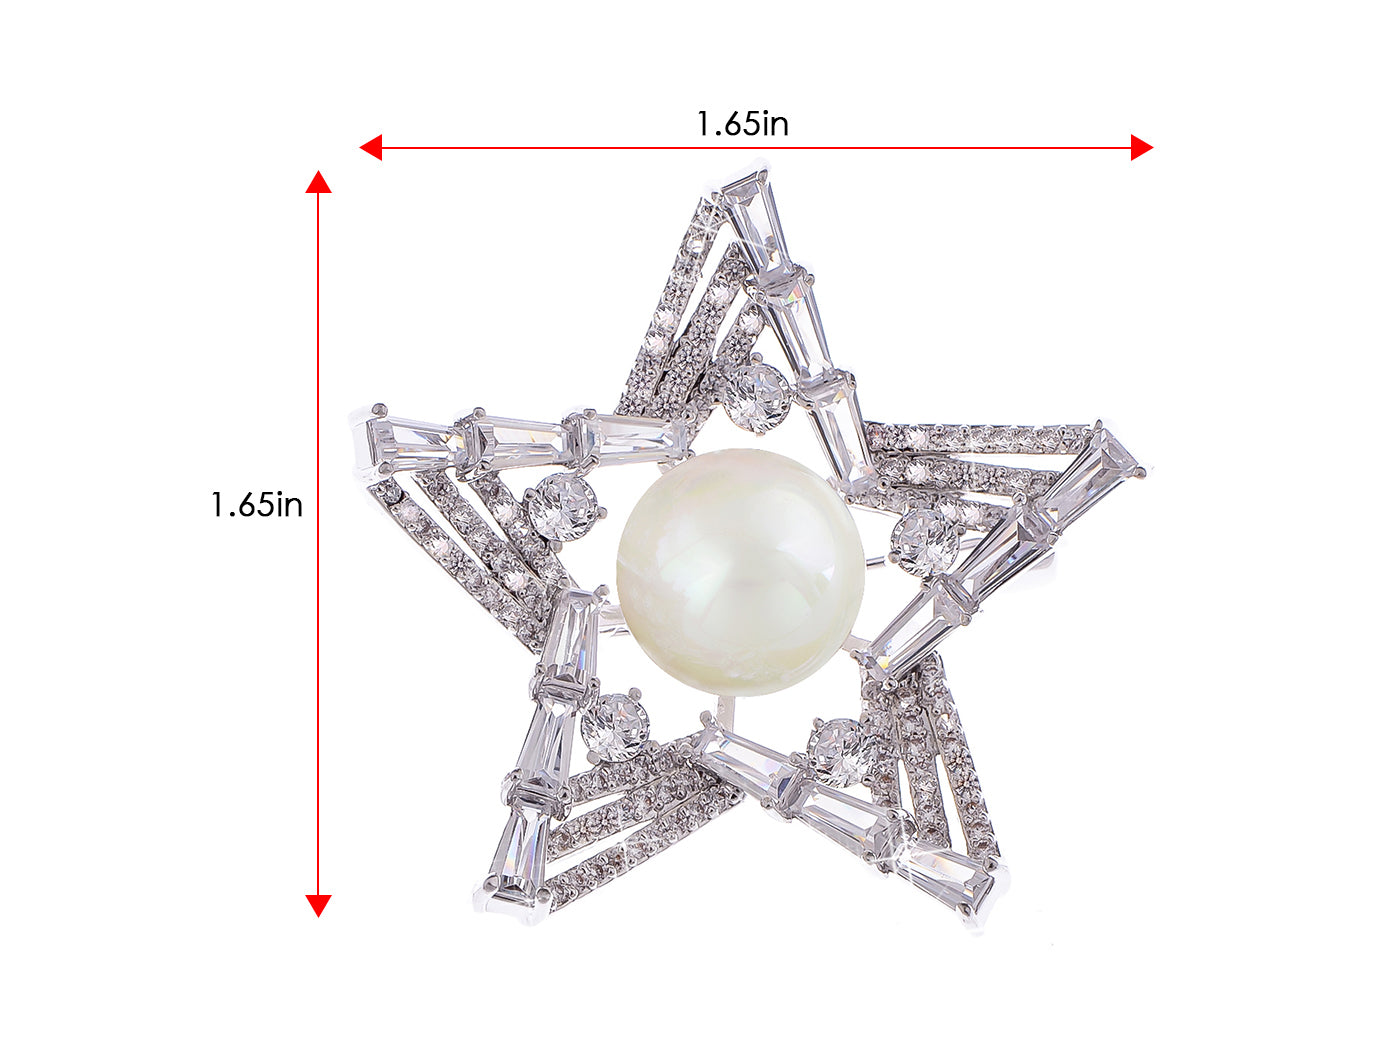 Colored Twinkle Bling Star Brooch Pin